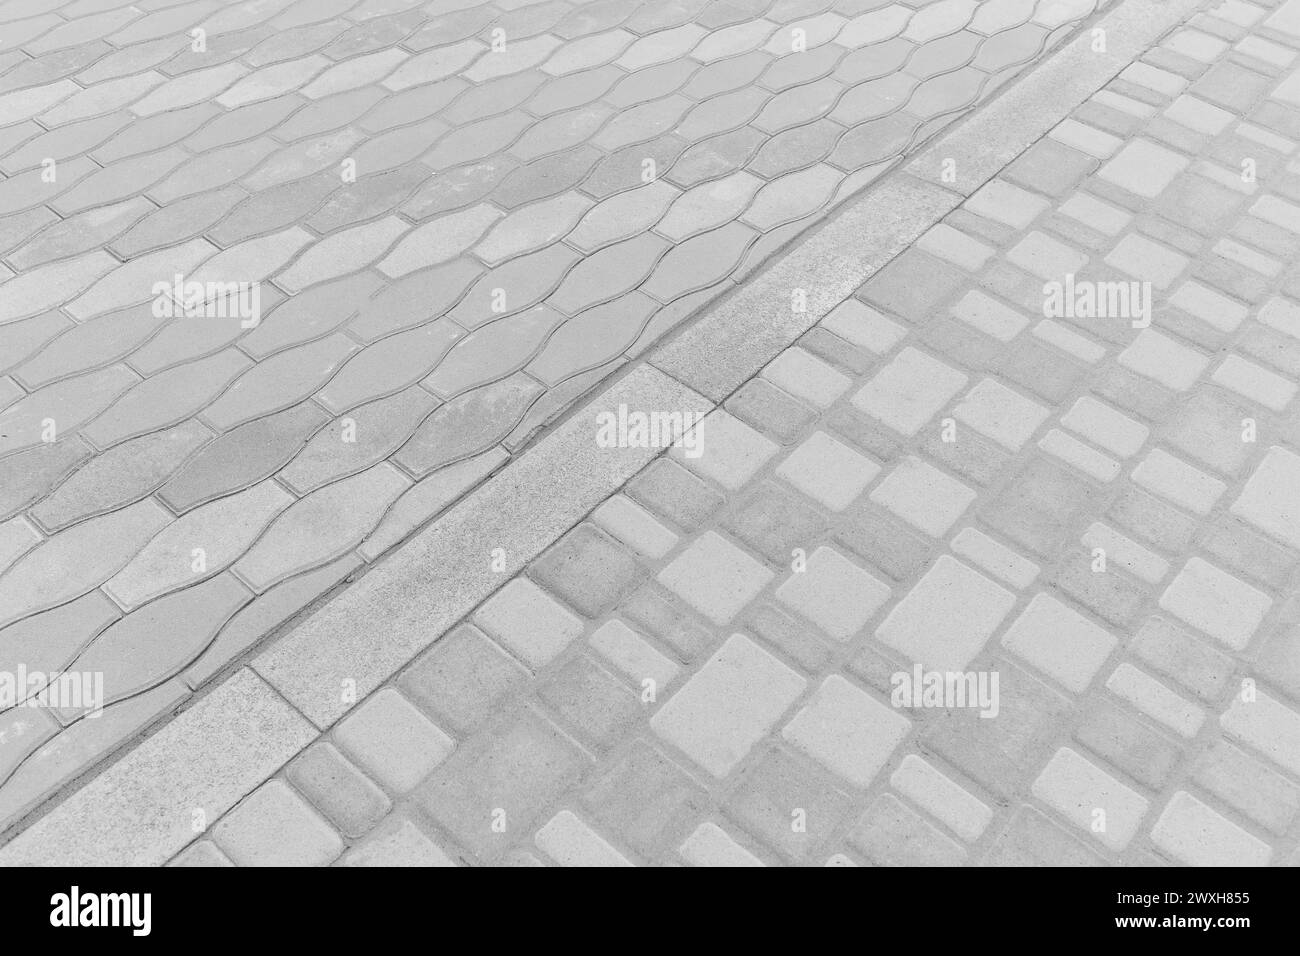 Two Kinds Paving Tiles Dividing Border Curb Mosaic Stone Street Road City Texture Background Light White. Stock Photo